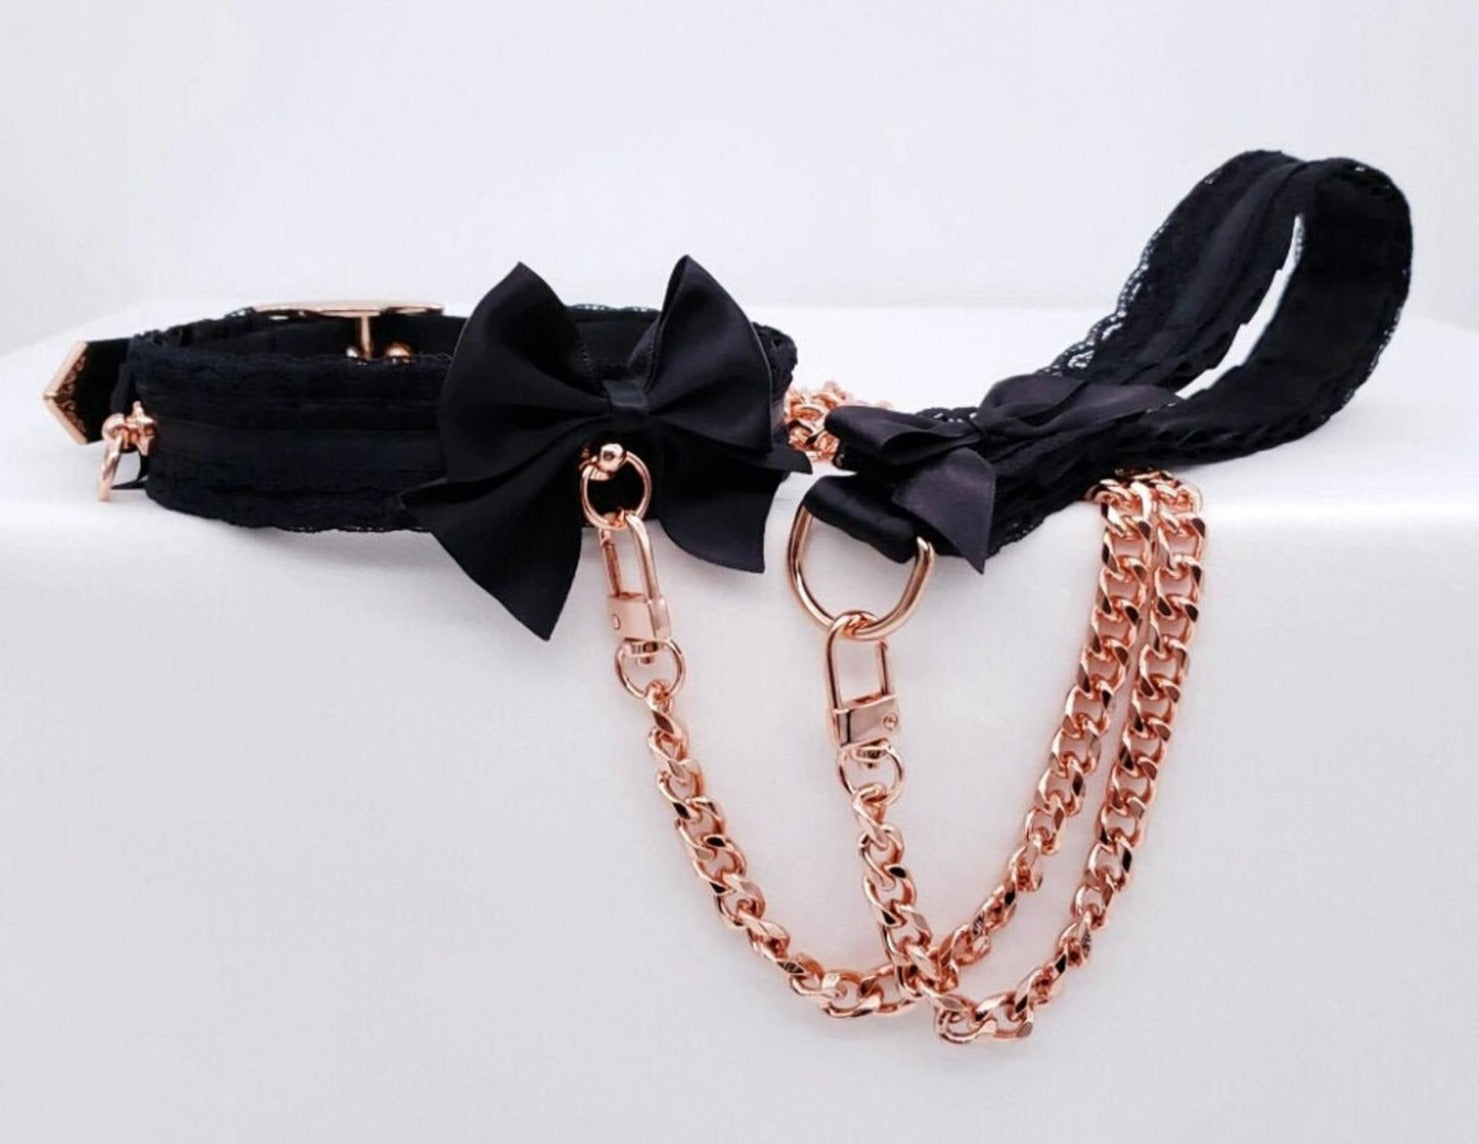 Luxe Black Lace and Rose Gold Collar and Leash BDSM Set